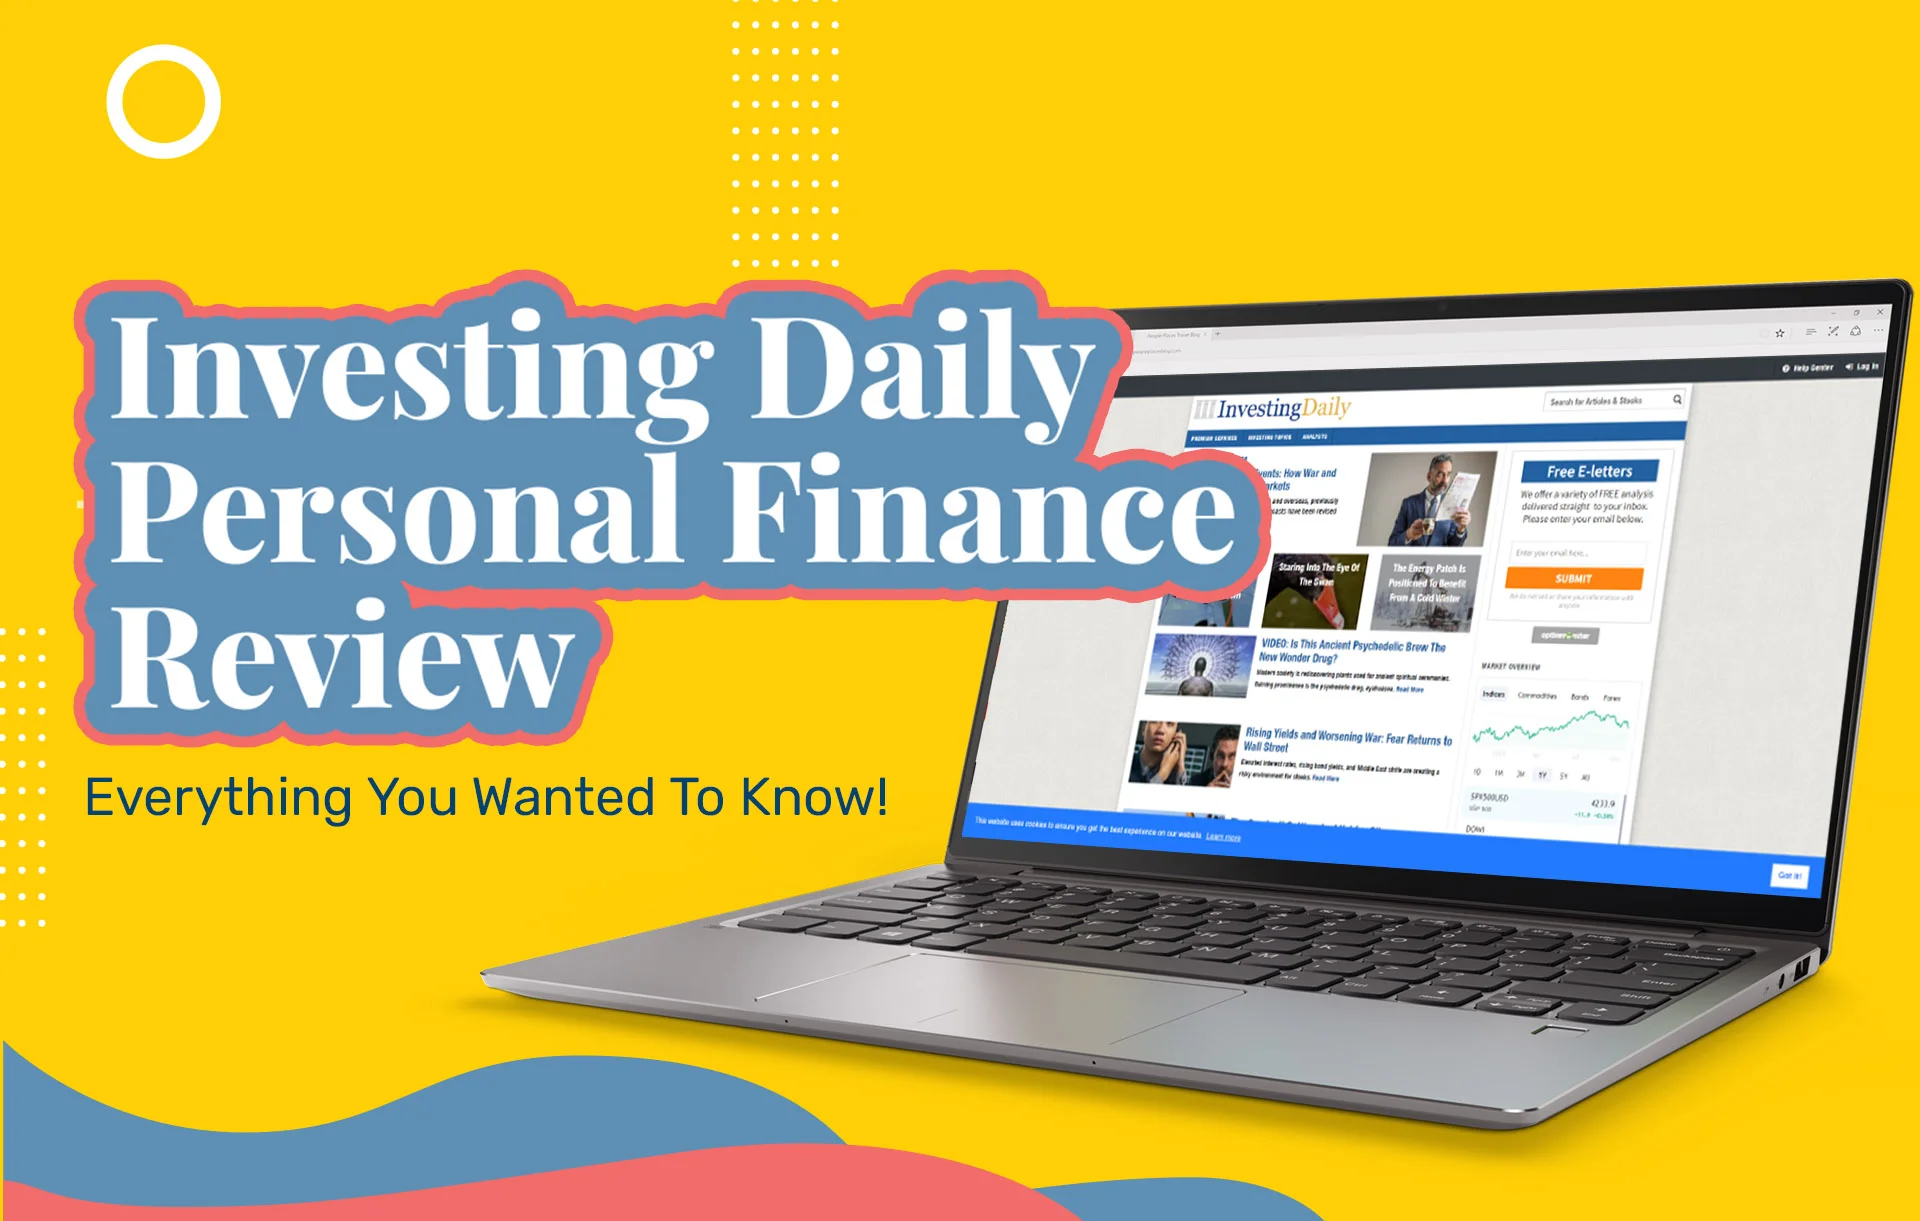 Investing Daily Personal Finance Reviews